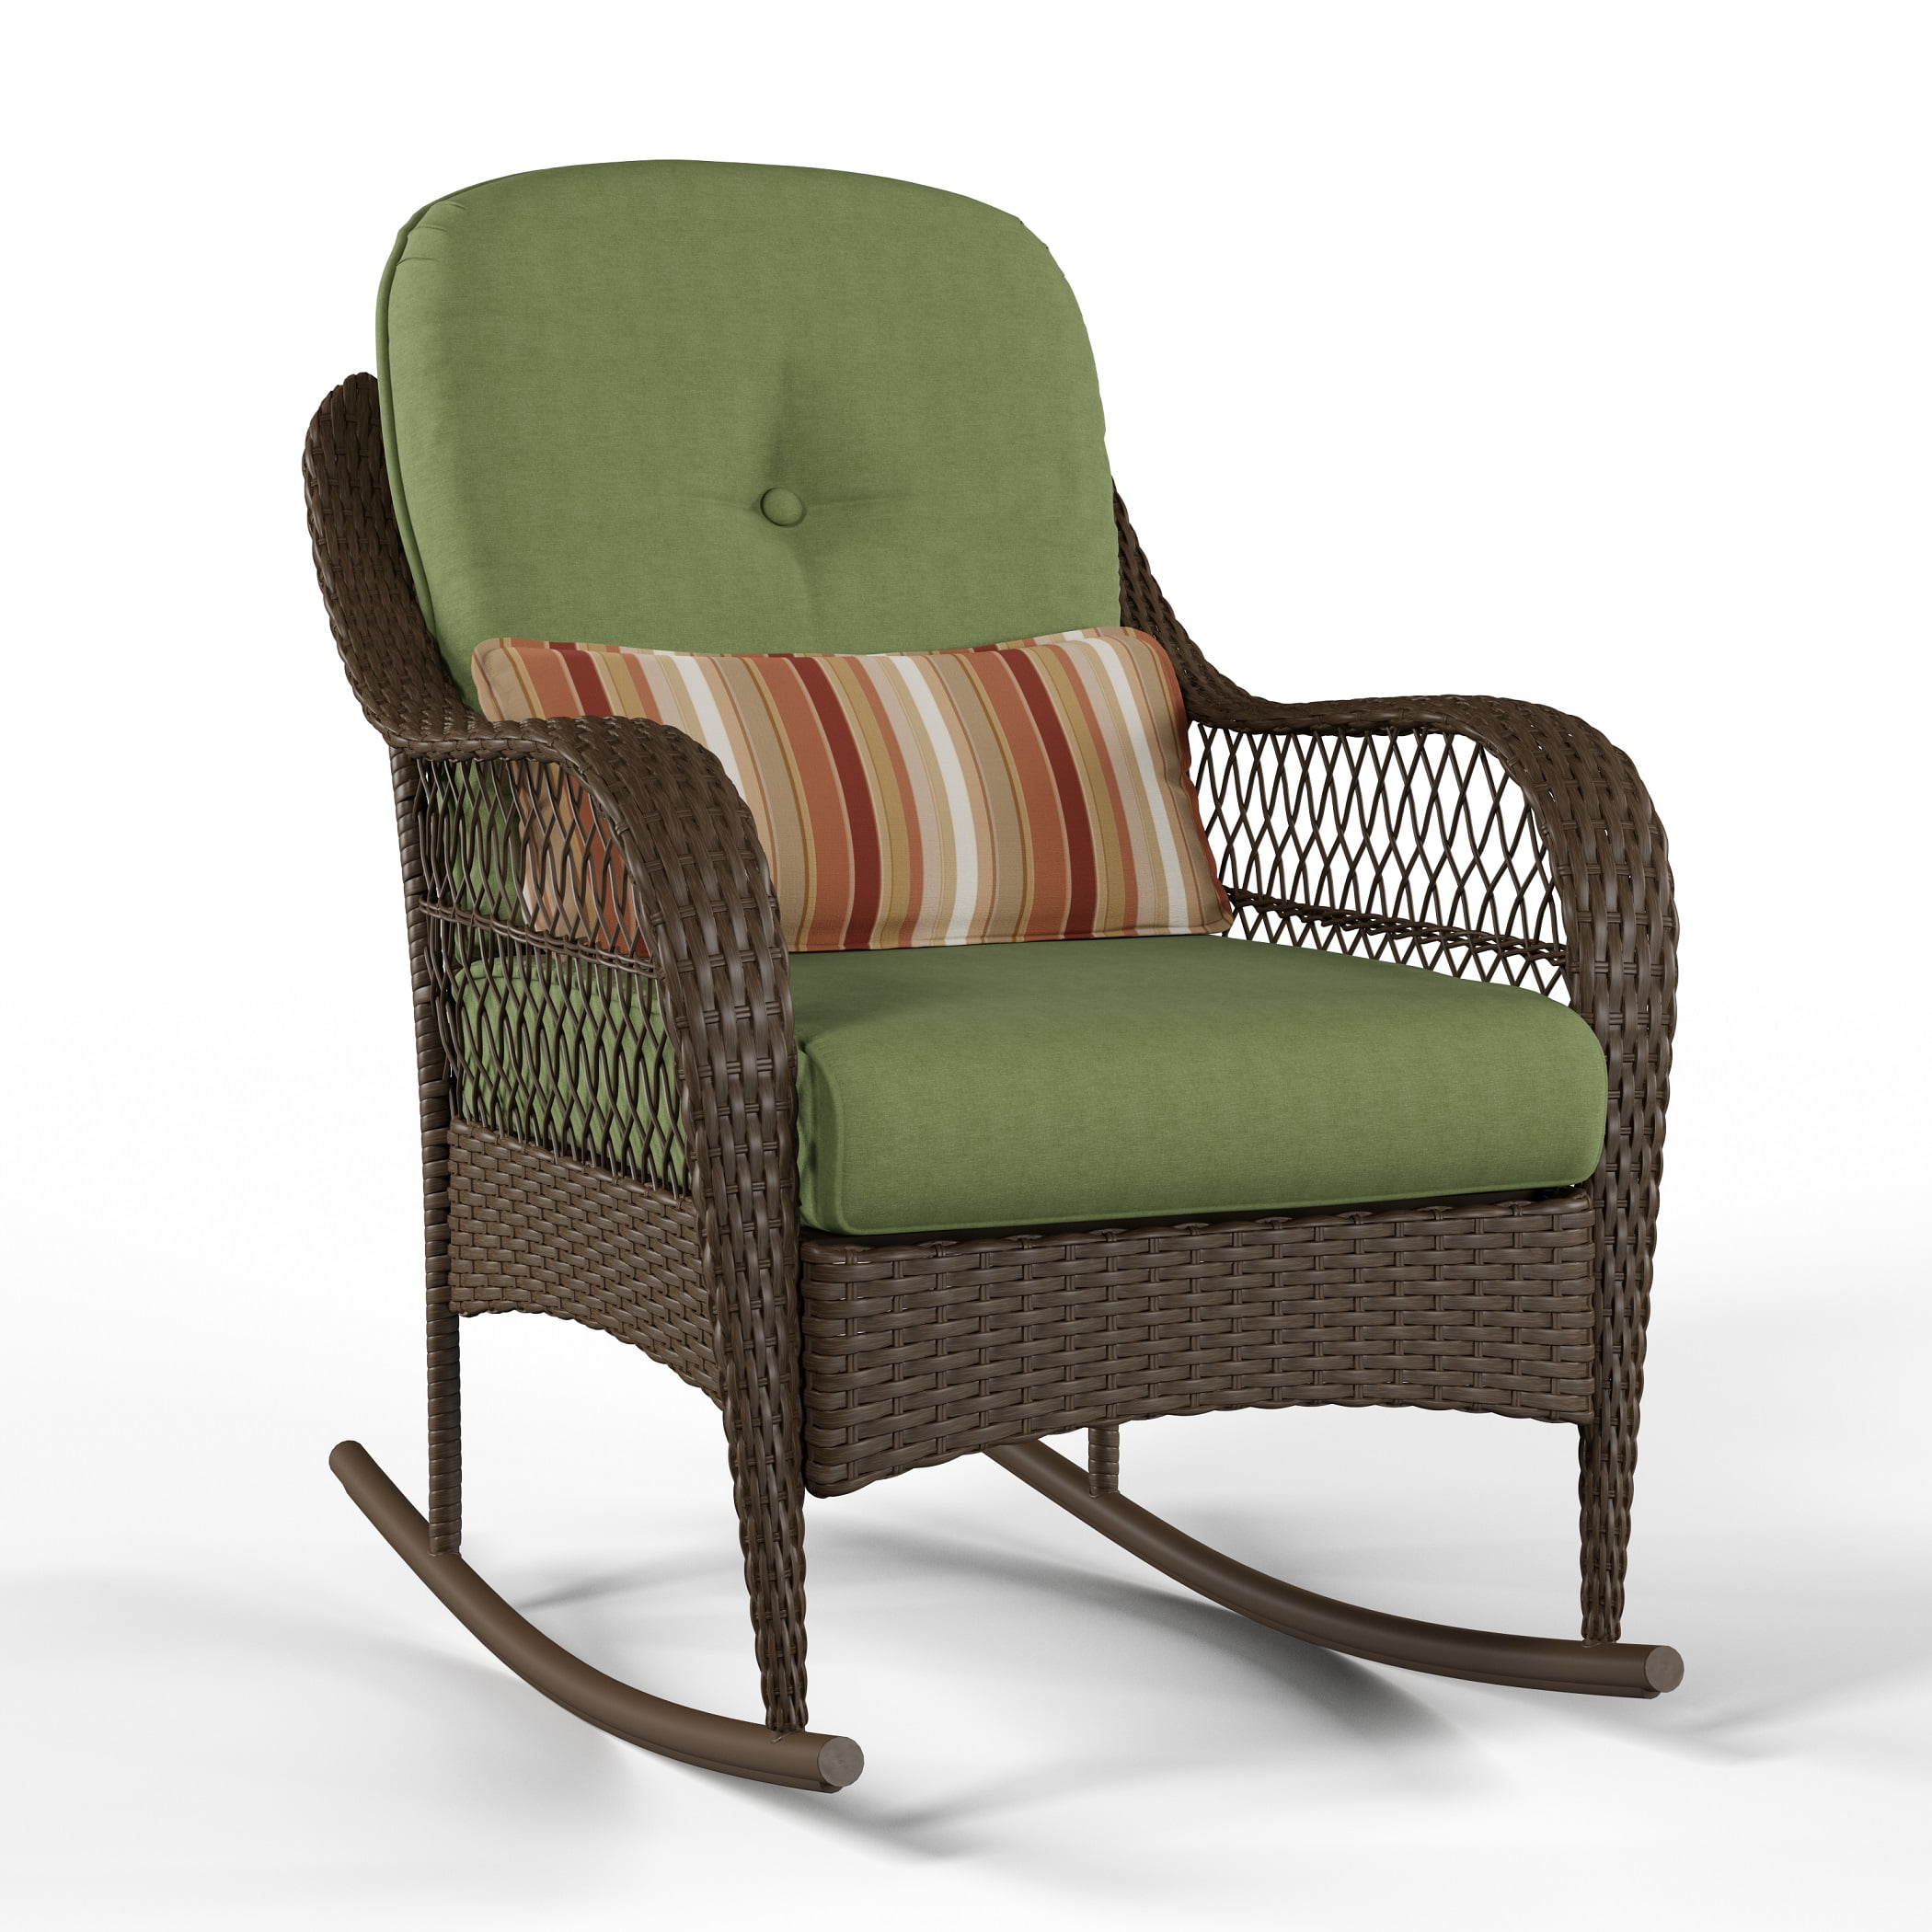 Featured image of post Outdoor Rocking Chair At Walmart - You will find a high quality outdoor rocking chair at an affordable.